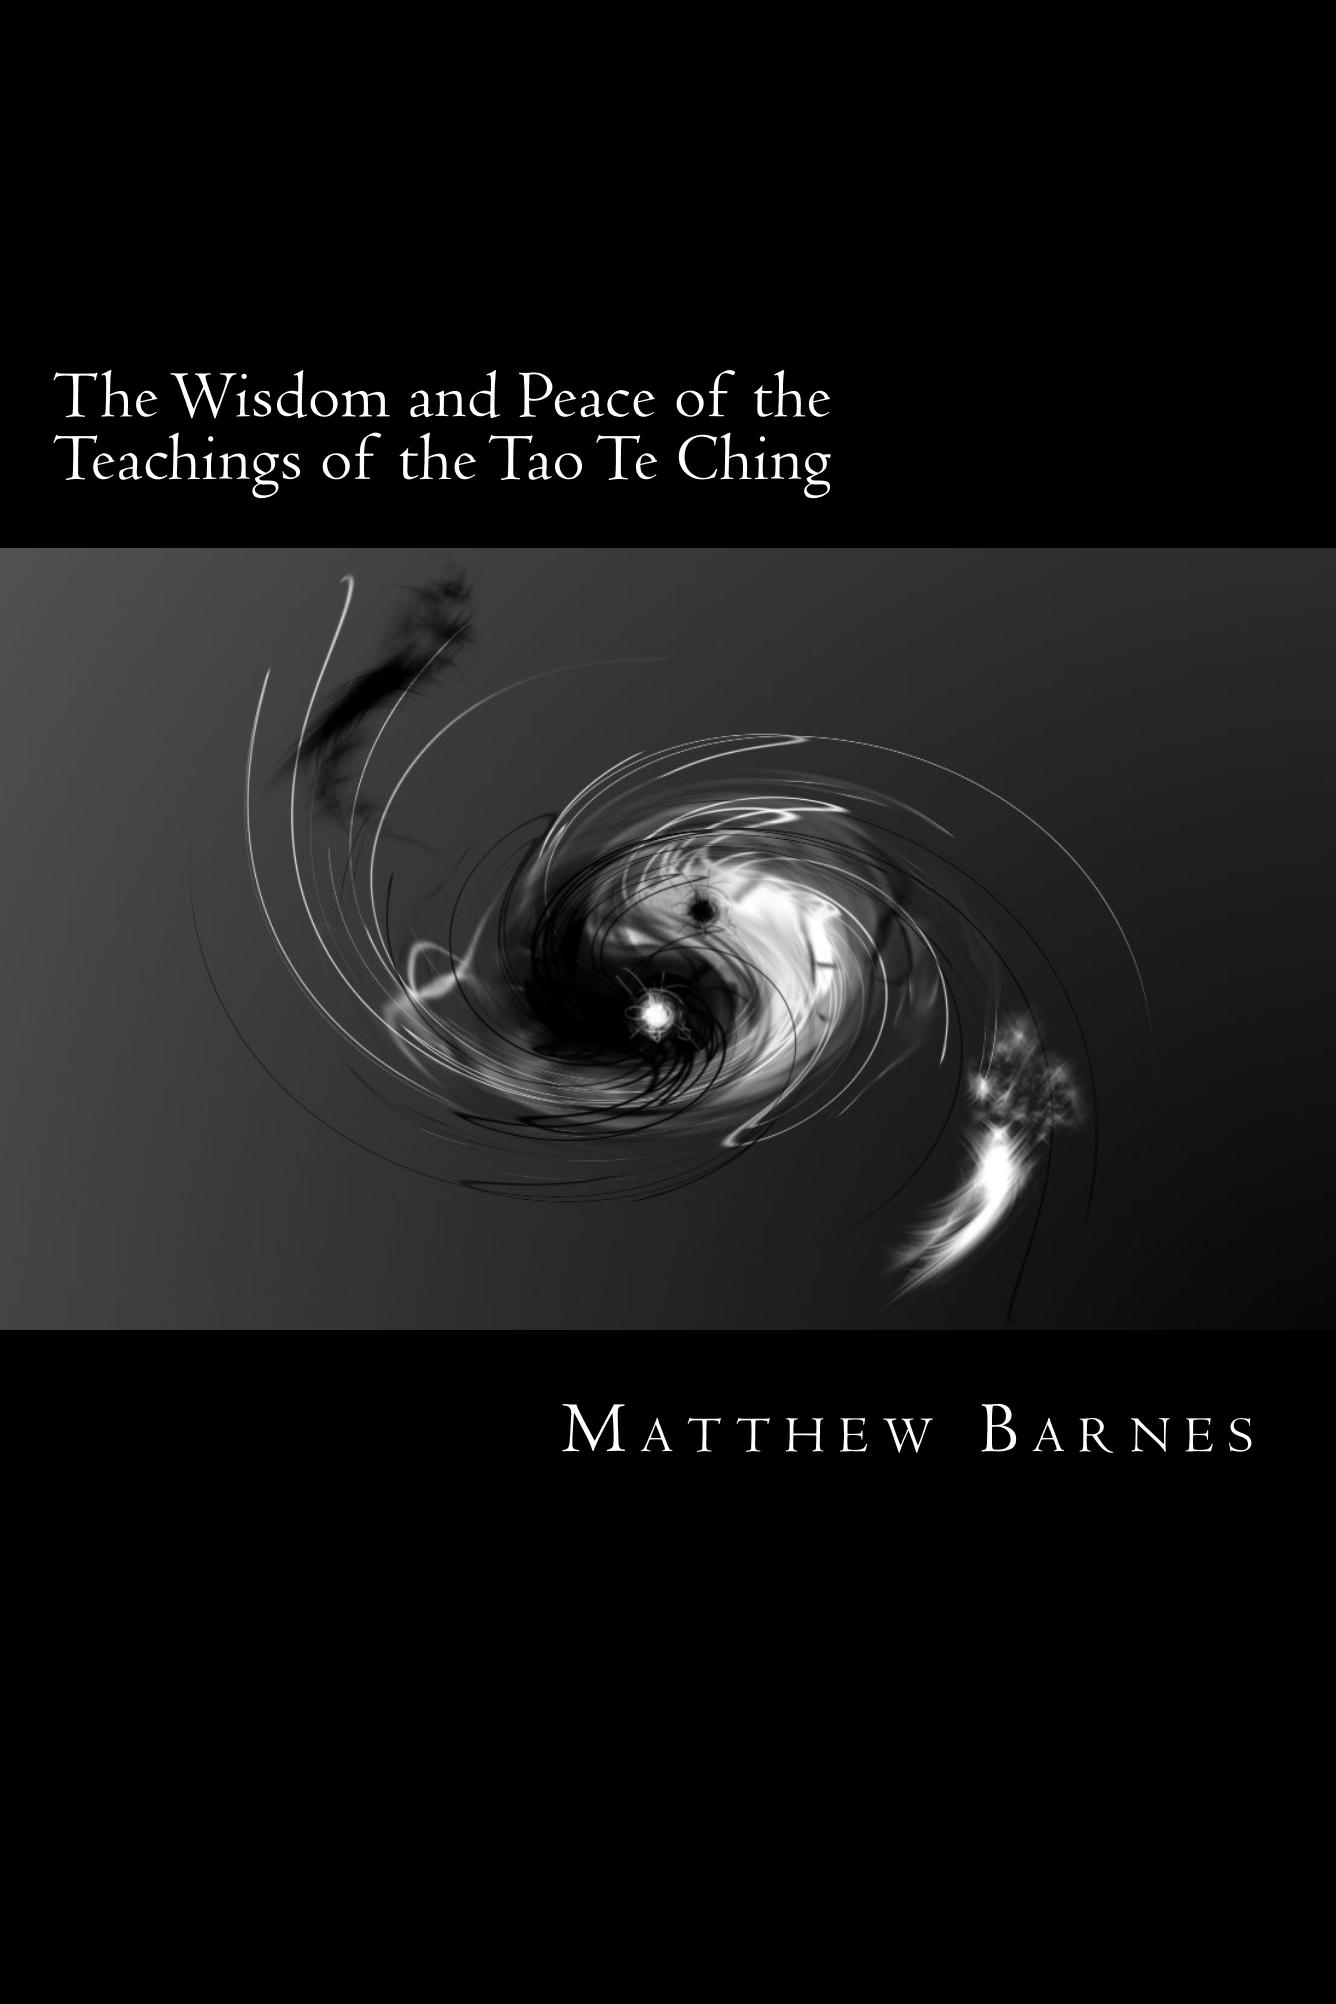 FREE: The Wisdom and Peace of the Teachings of the Tao Te Ching by Matthew Barnes